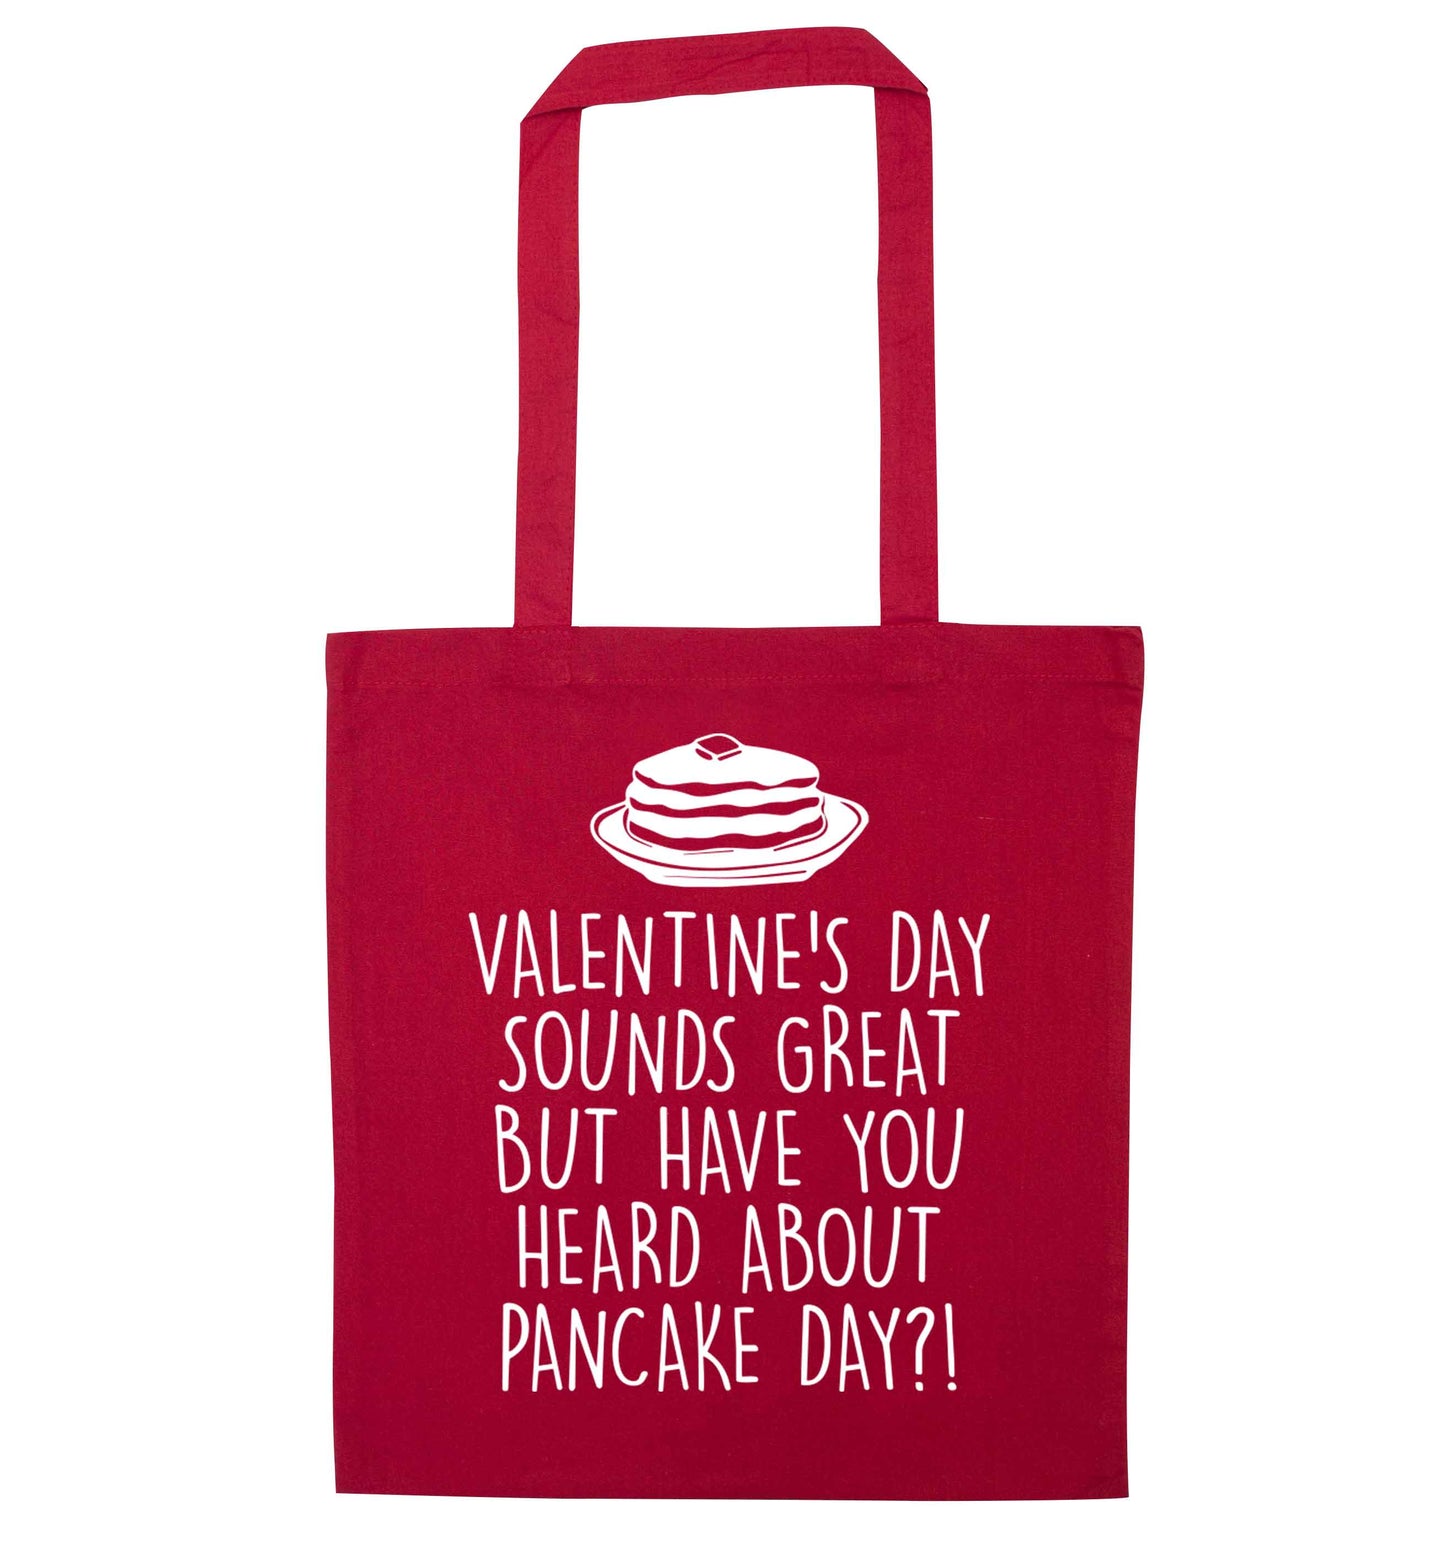 Valentine's day sounds great but have you heard about pancake day?! red tote bag